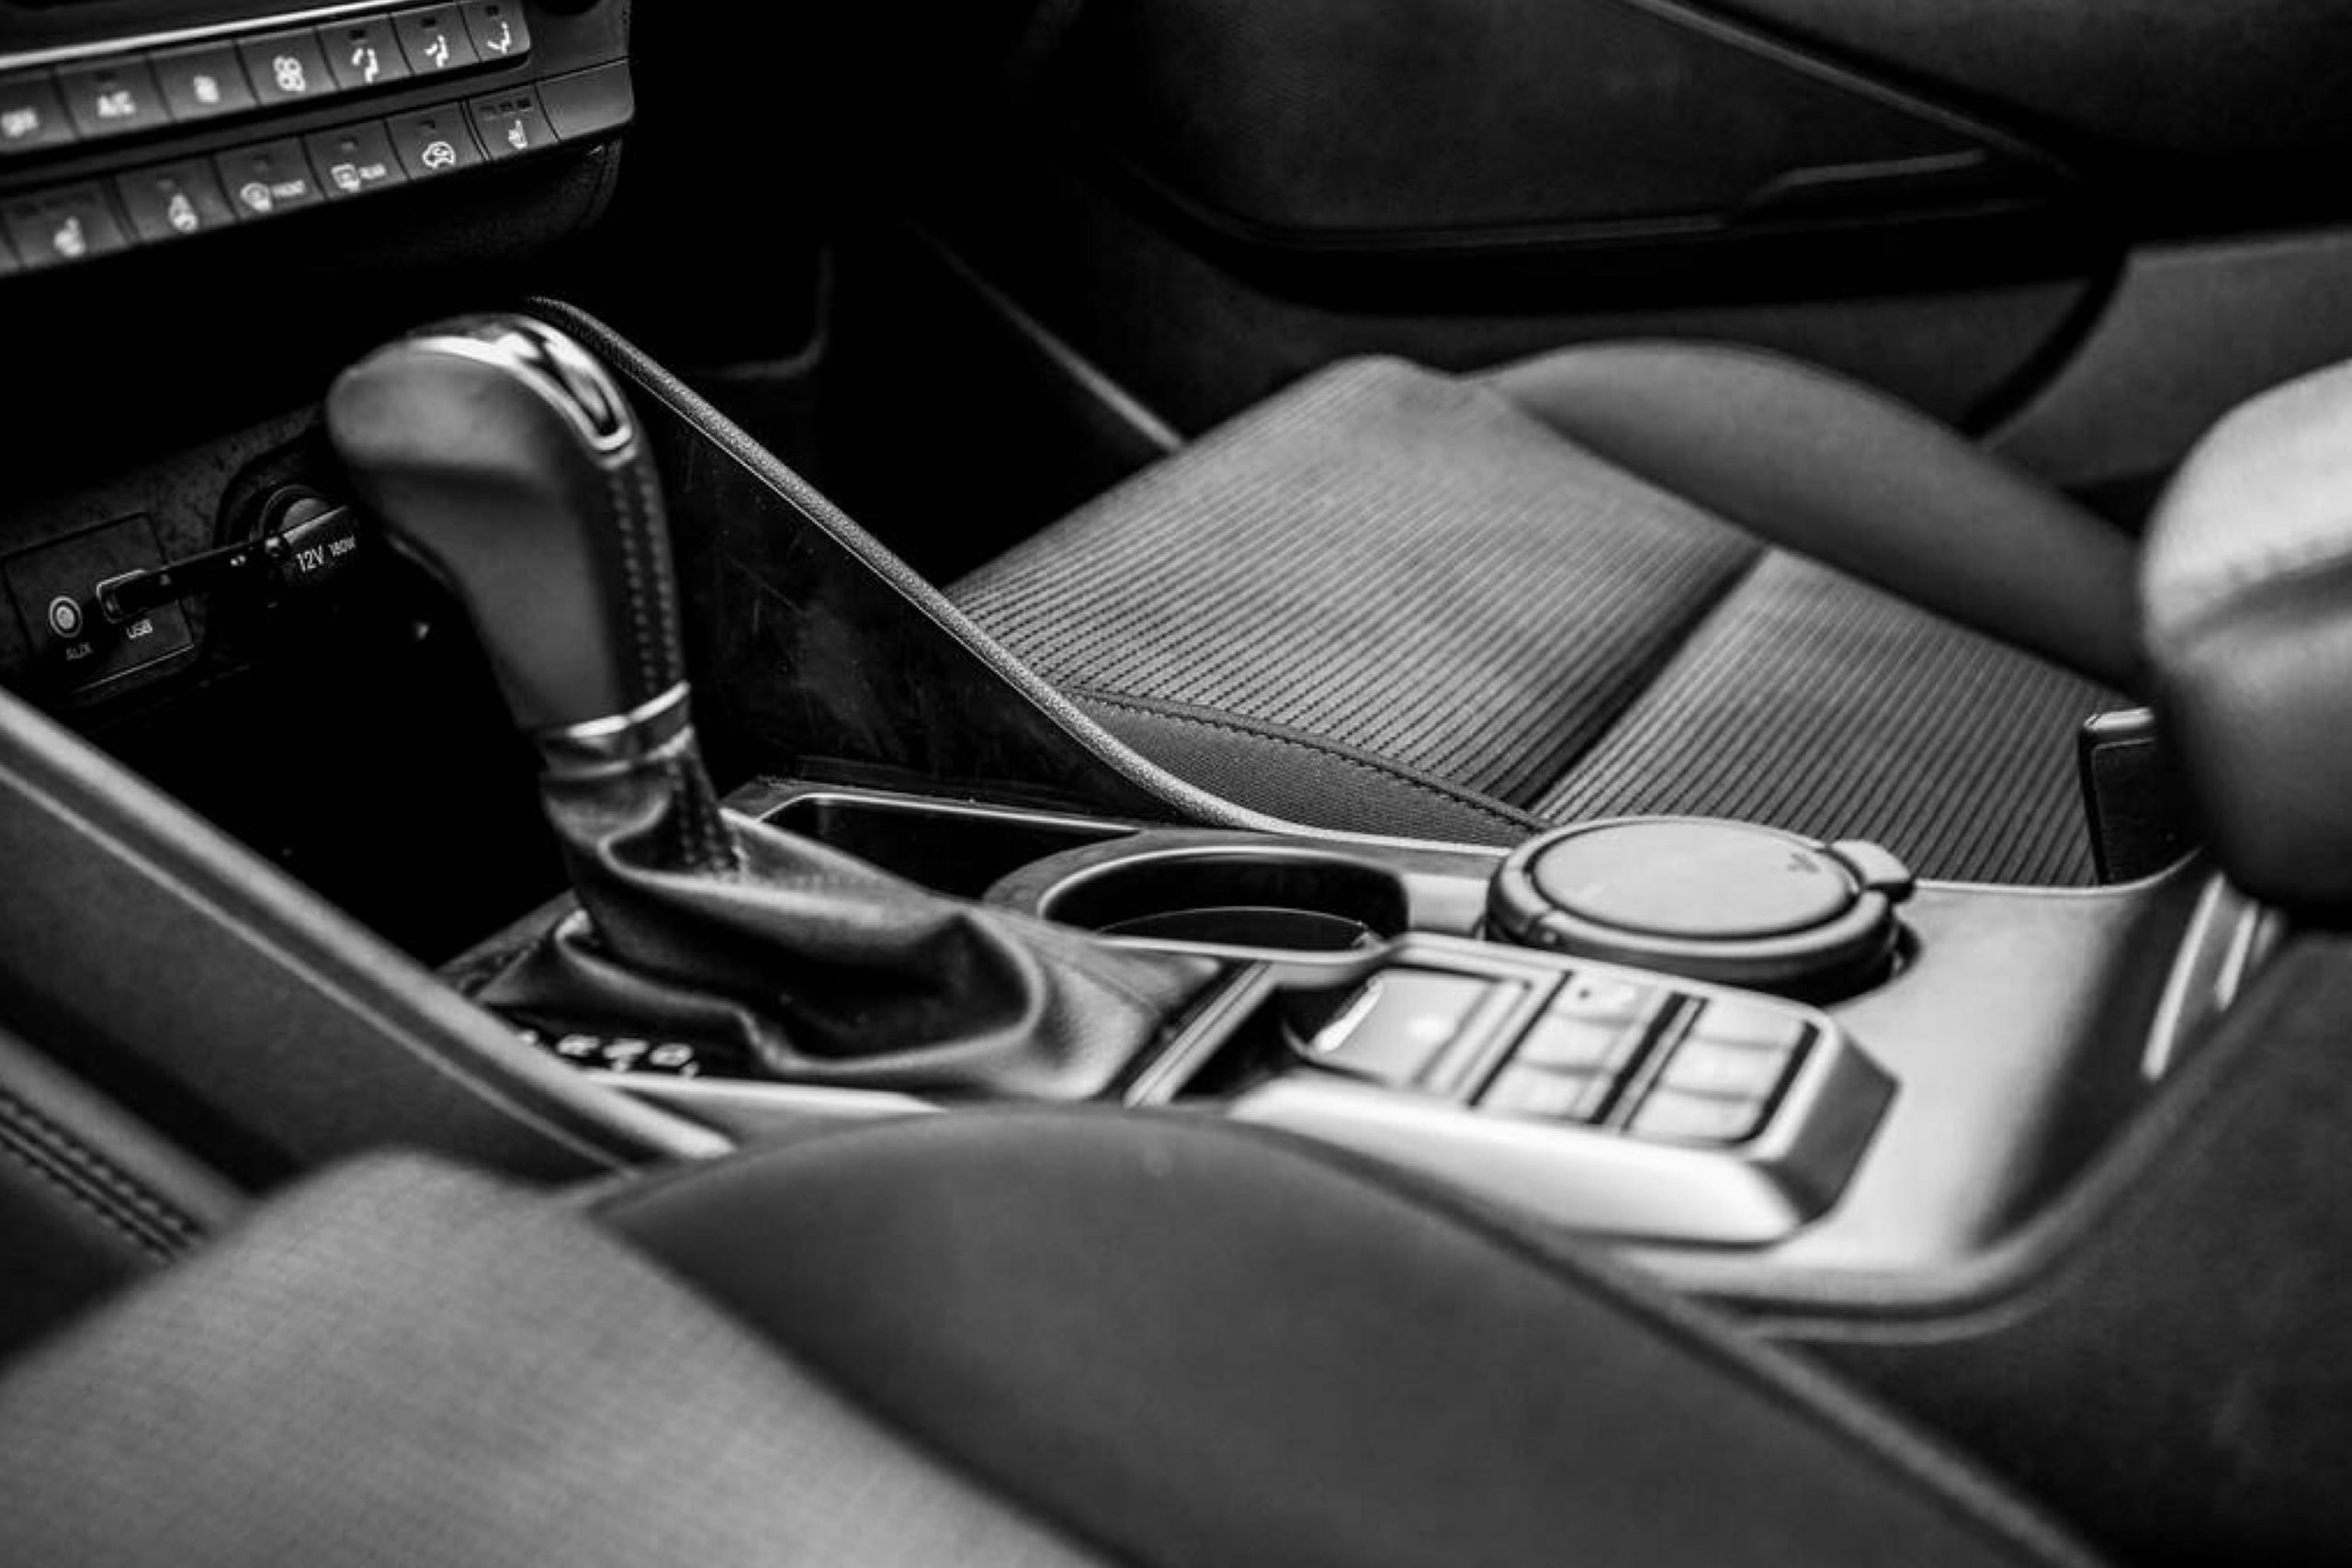  Cleaning Between Car Seats. All You Need to Know As a Car Owner